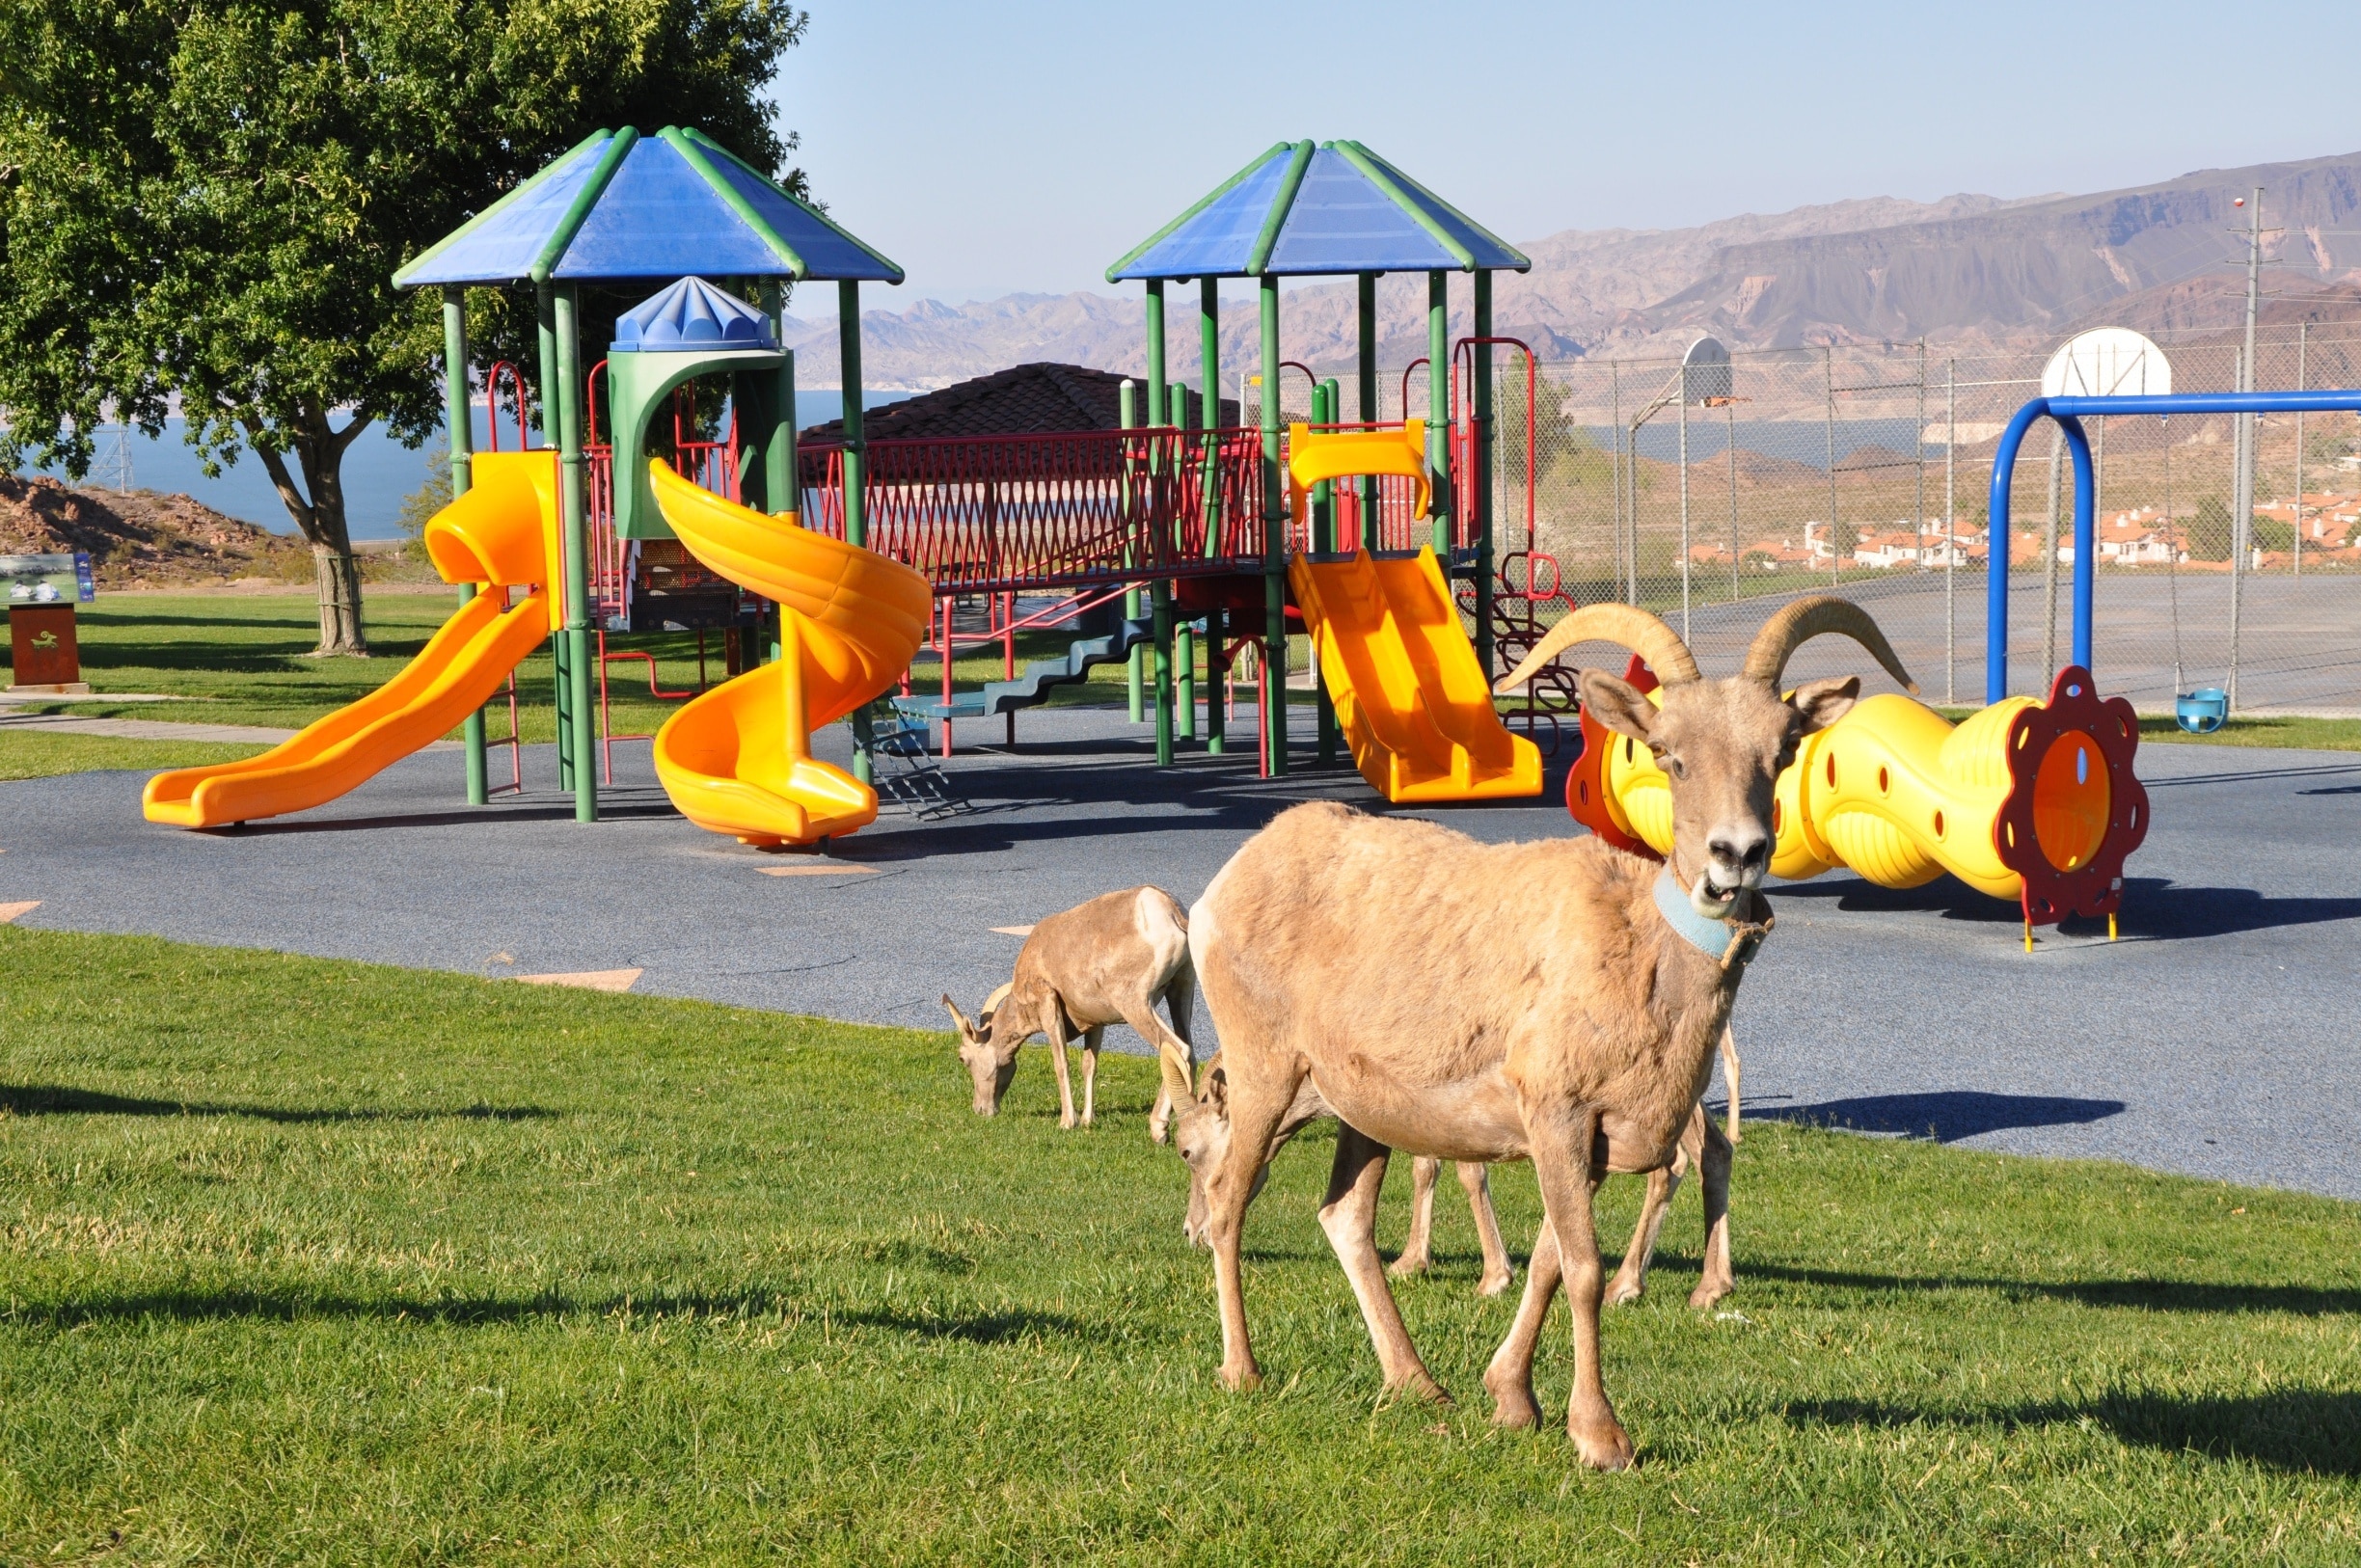 Really wanted to see the Bighorn Sheep, and was told the the easiest and most reliable place to get a view of them was at Hemenway Park!

It was really amusing to see a whole herd of sheep wandering around the kids' playground. Not surprising they were there...lush grass for snacking.